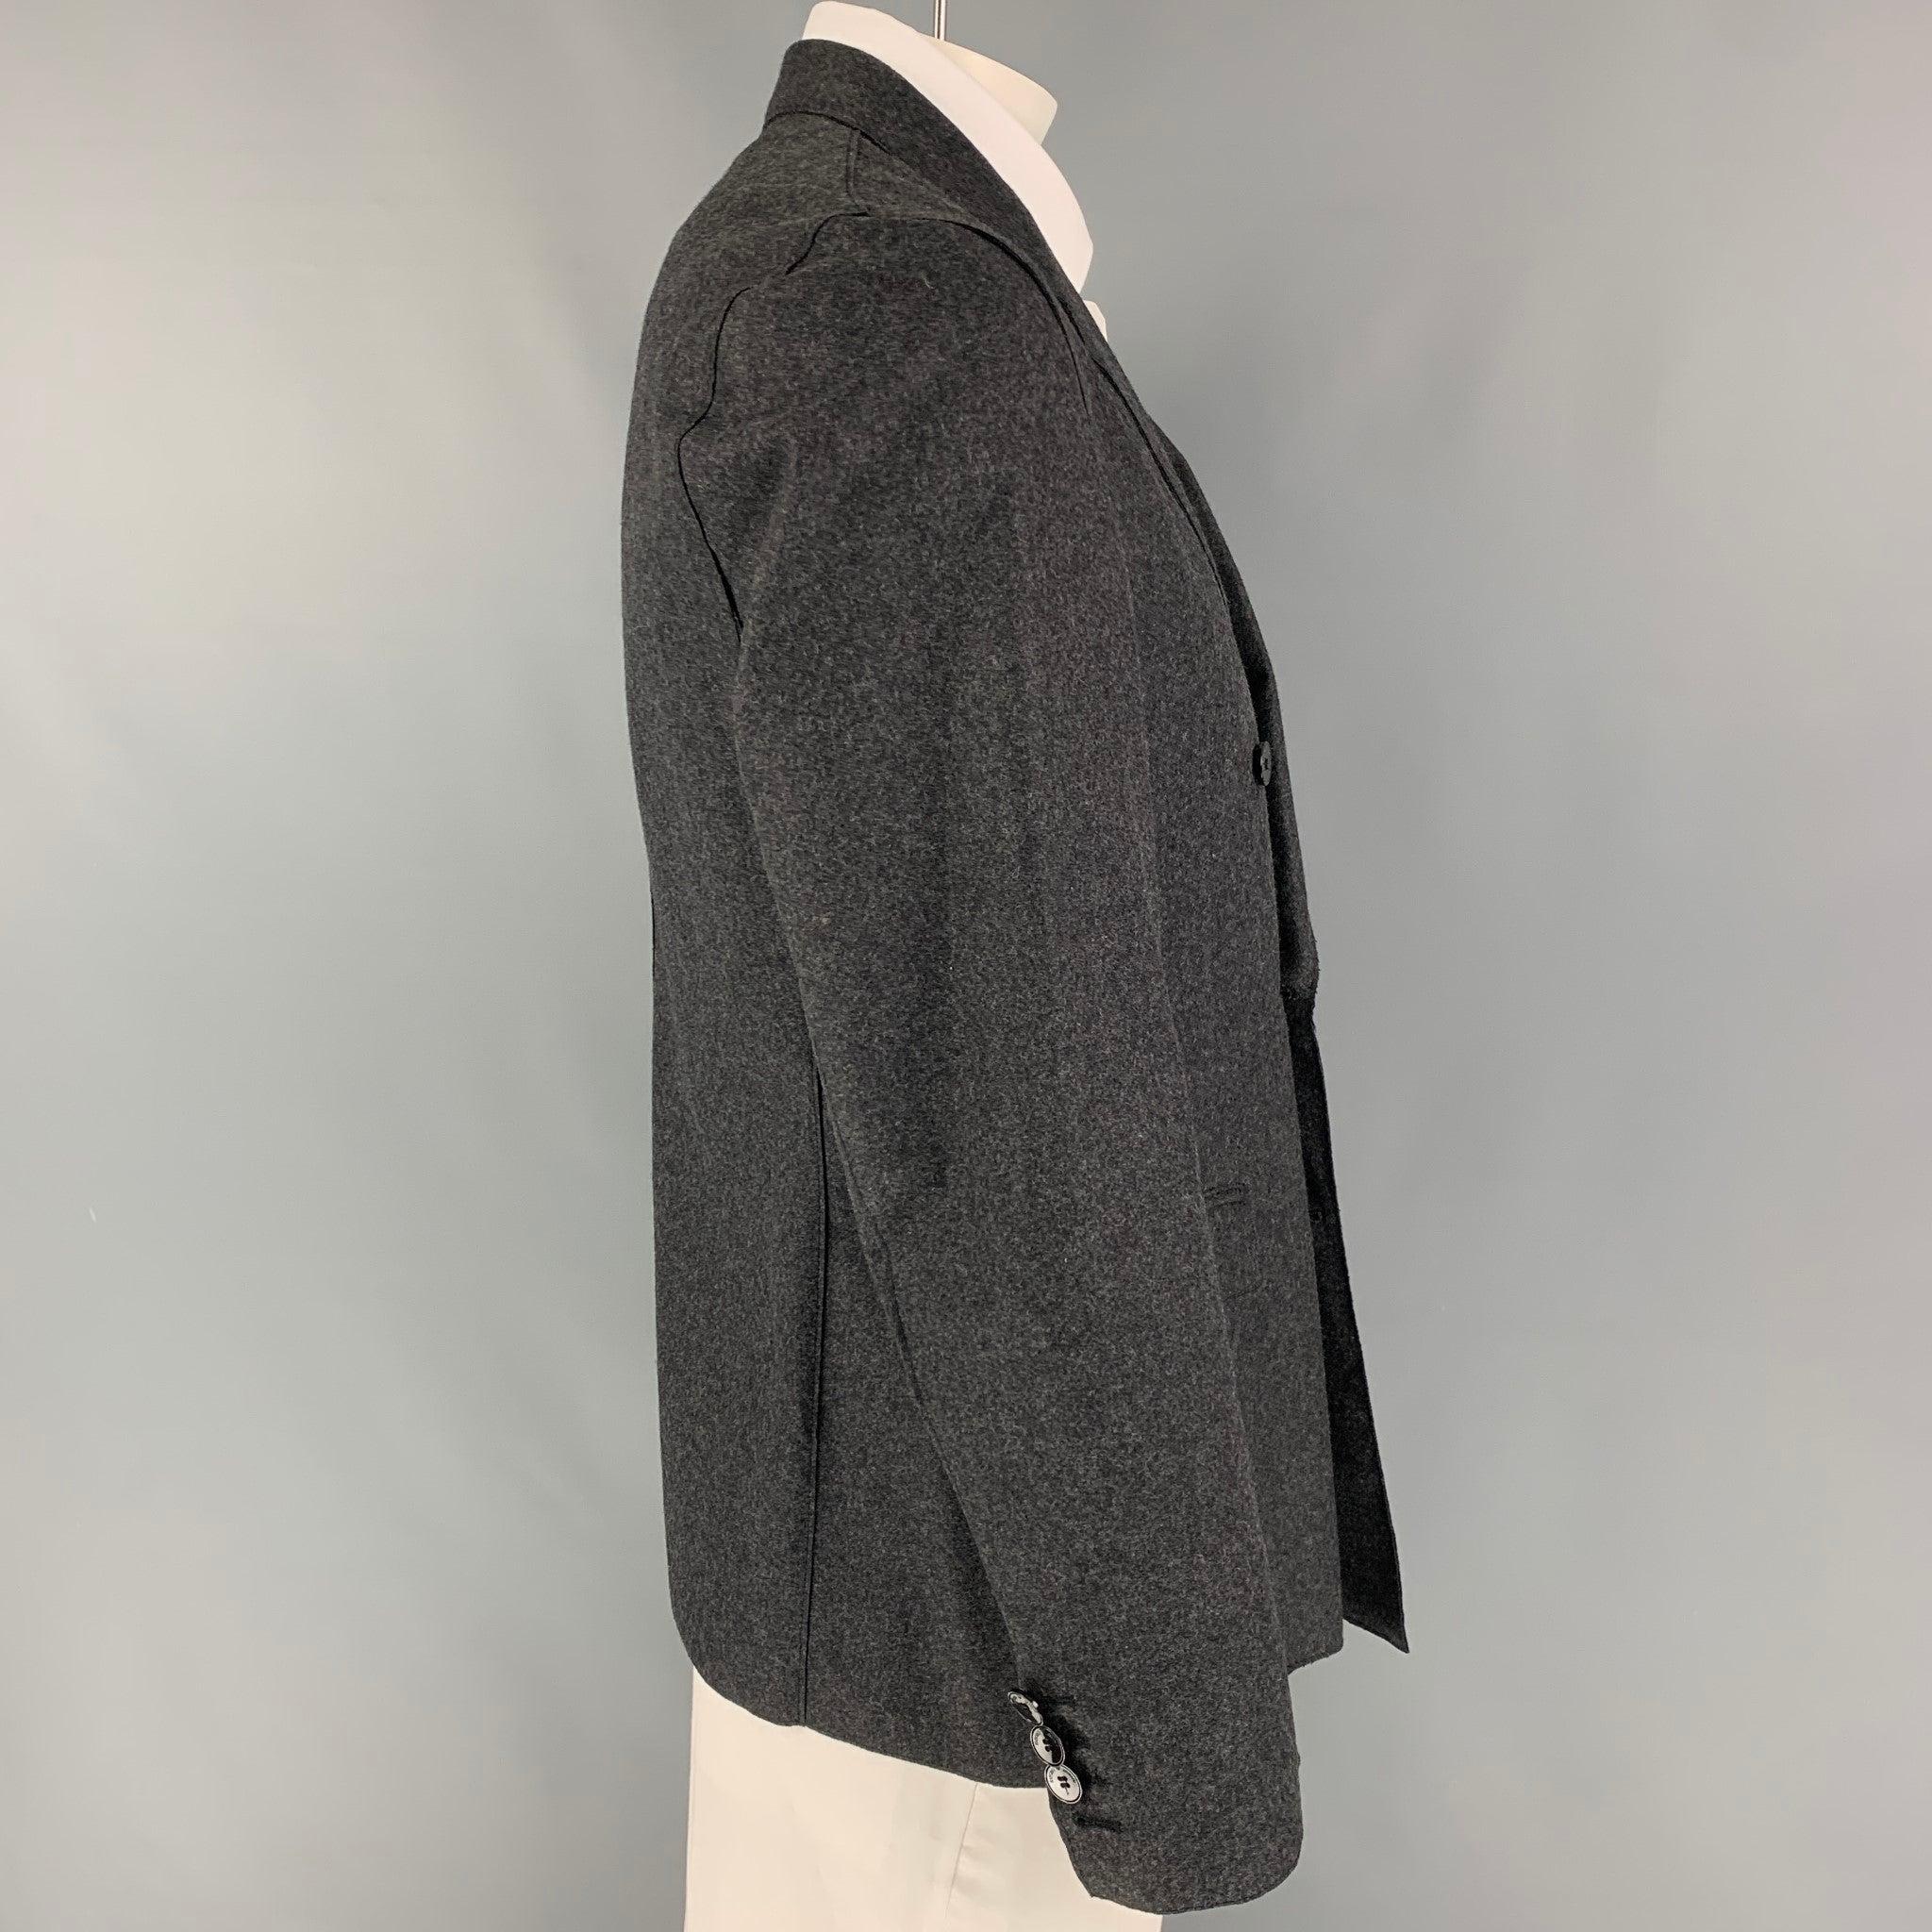 EMPORIO ARMANI coat comes in a charcoal heather wool / polyamide featuring a notch lapel, flap pockets, single back vent, and a double breasted closure. Made in Italy.
Very Good
Pre-Owned Condition. 

Marked:   52 

Measurements: 
 
Shoulder: 18.5